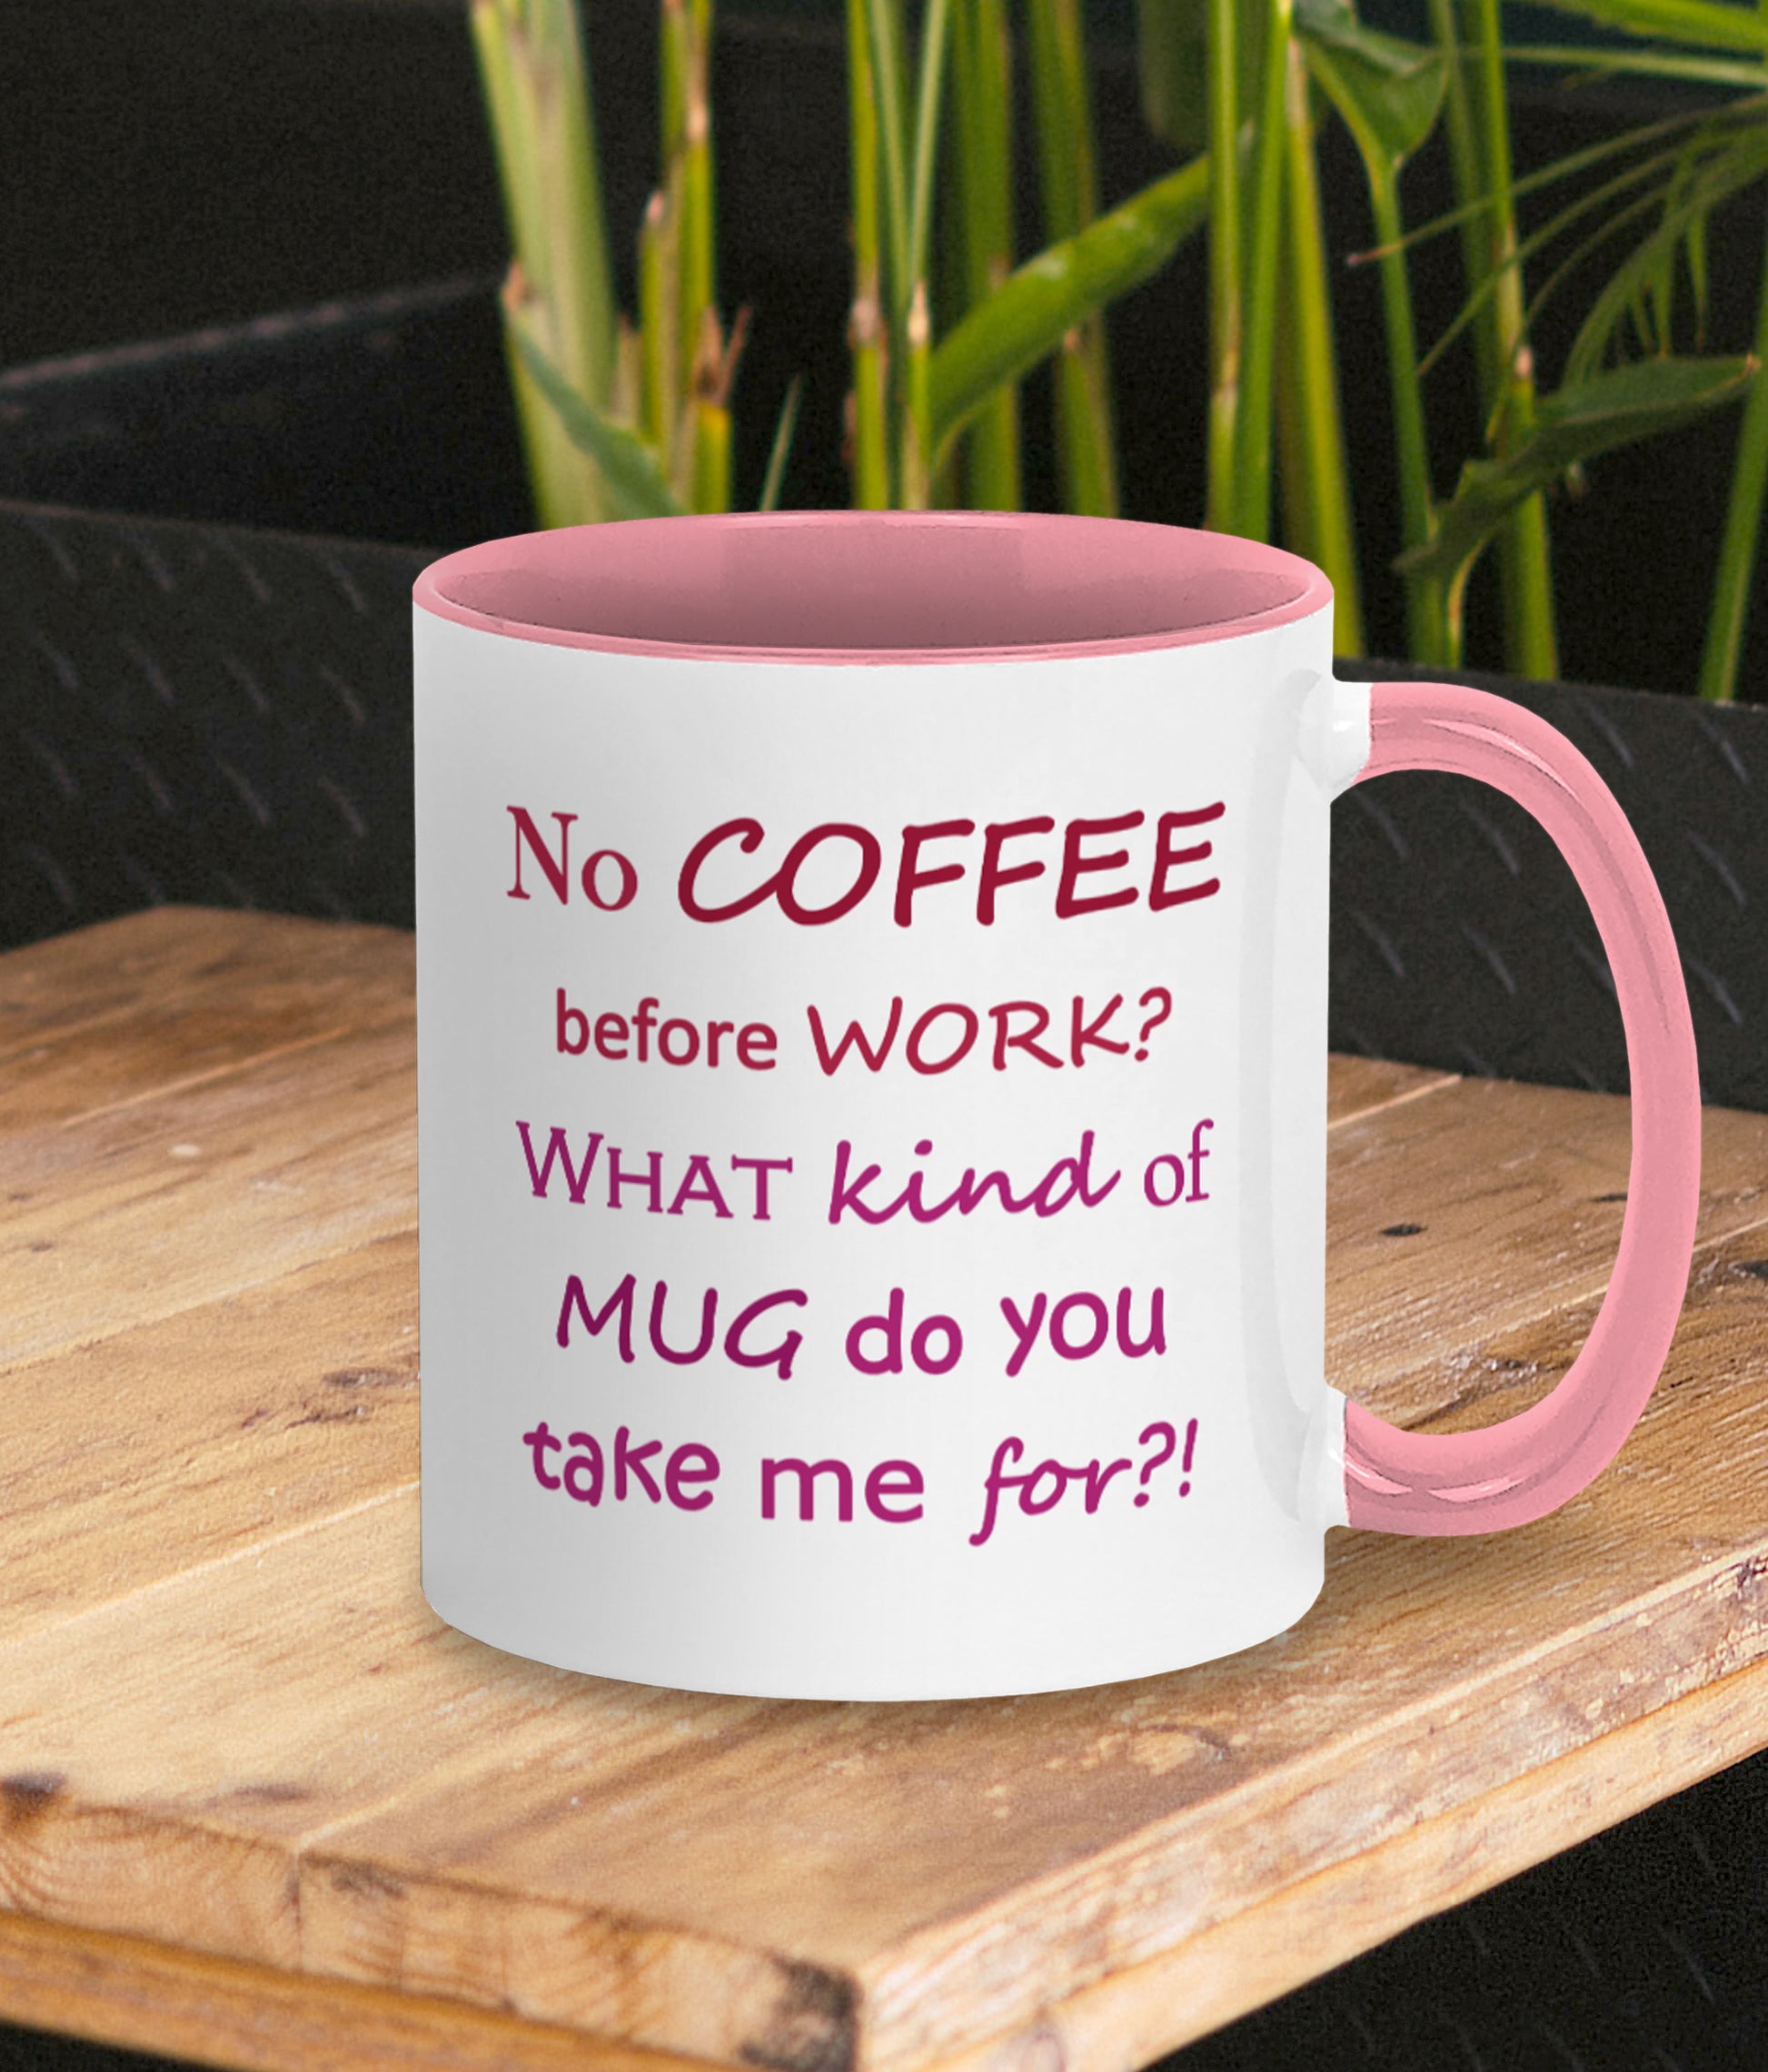 Hilarious mug for work. Gift for coffee lover and work bestie. White mug with dusty pink inner and handle. Two tone red/pink text on mug reads funny wording No COFFEE before WORK? WHAT kind of MUG do you take me for?!